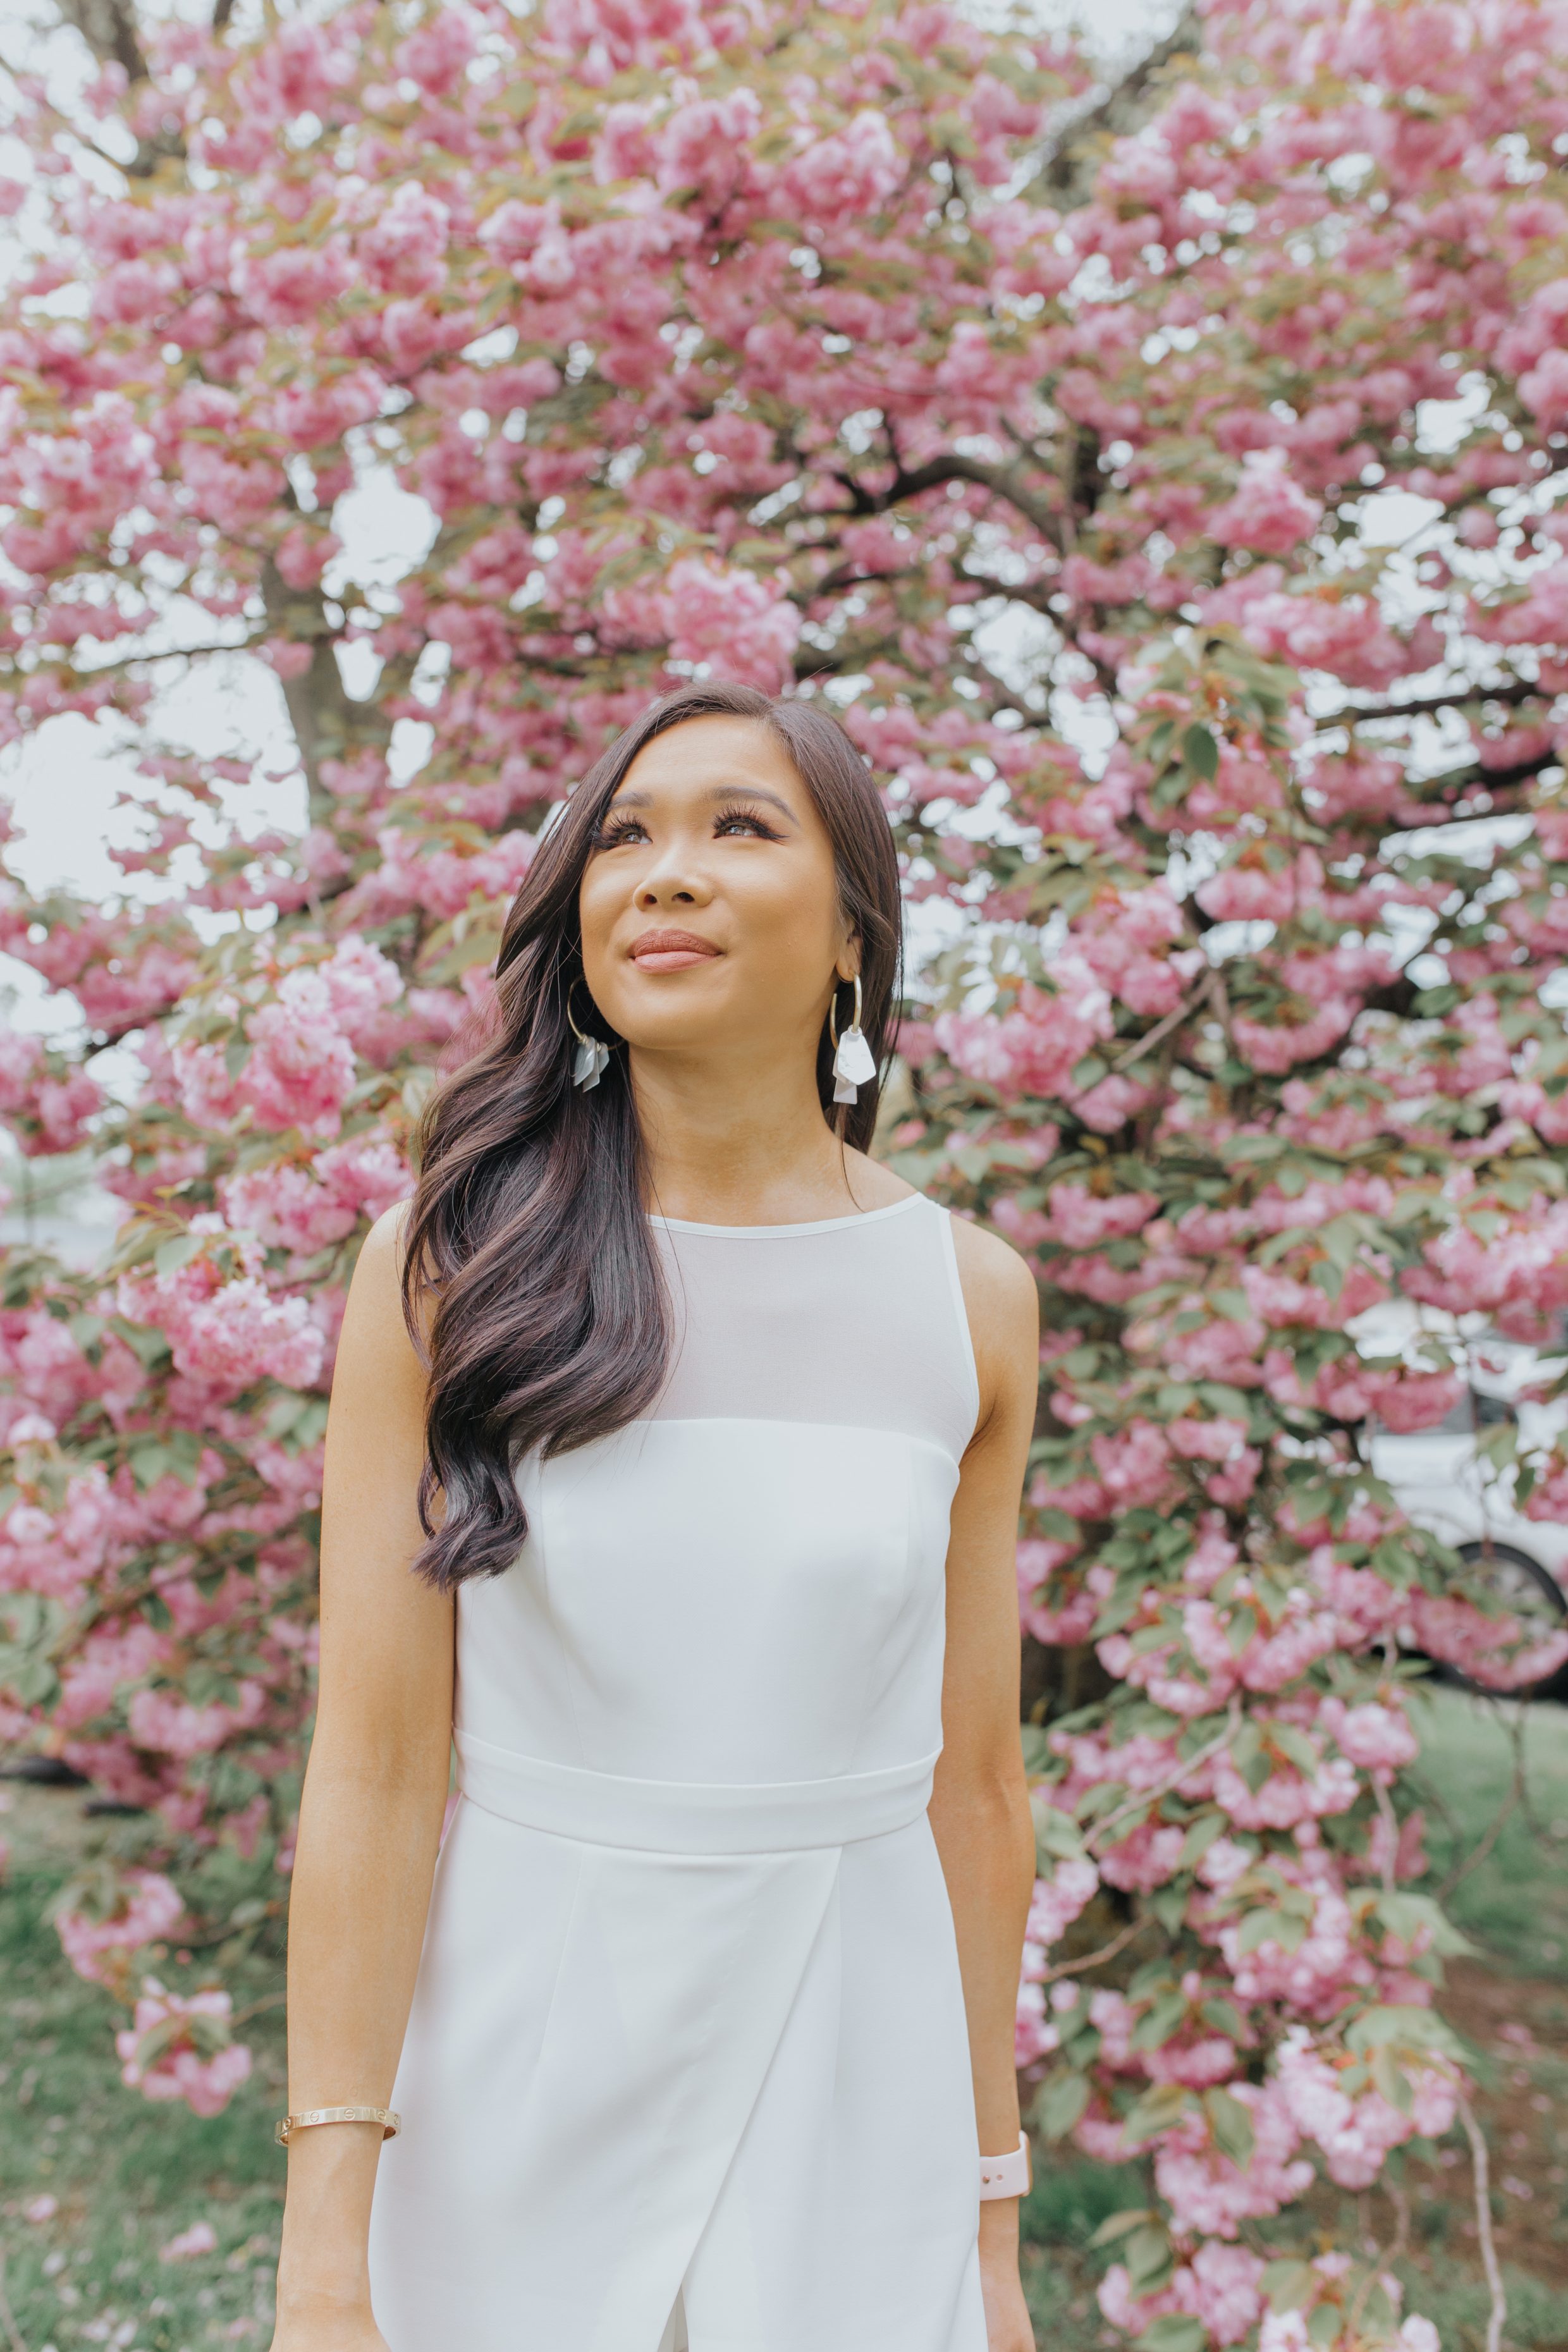 Hoang-Kim wears a white statement jumpsuit amidst the cherry blossoms in Washington, D.C.